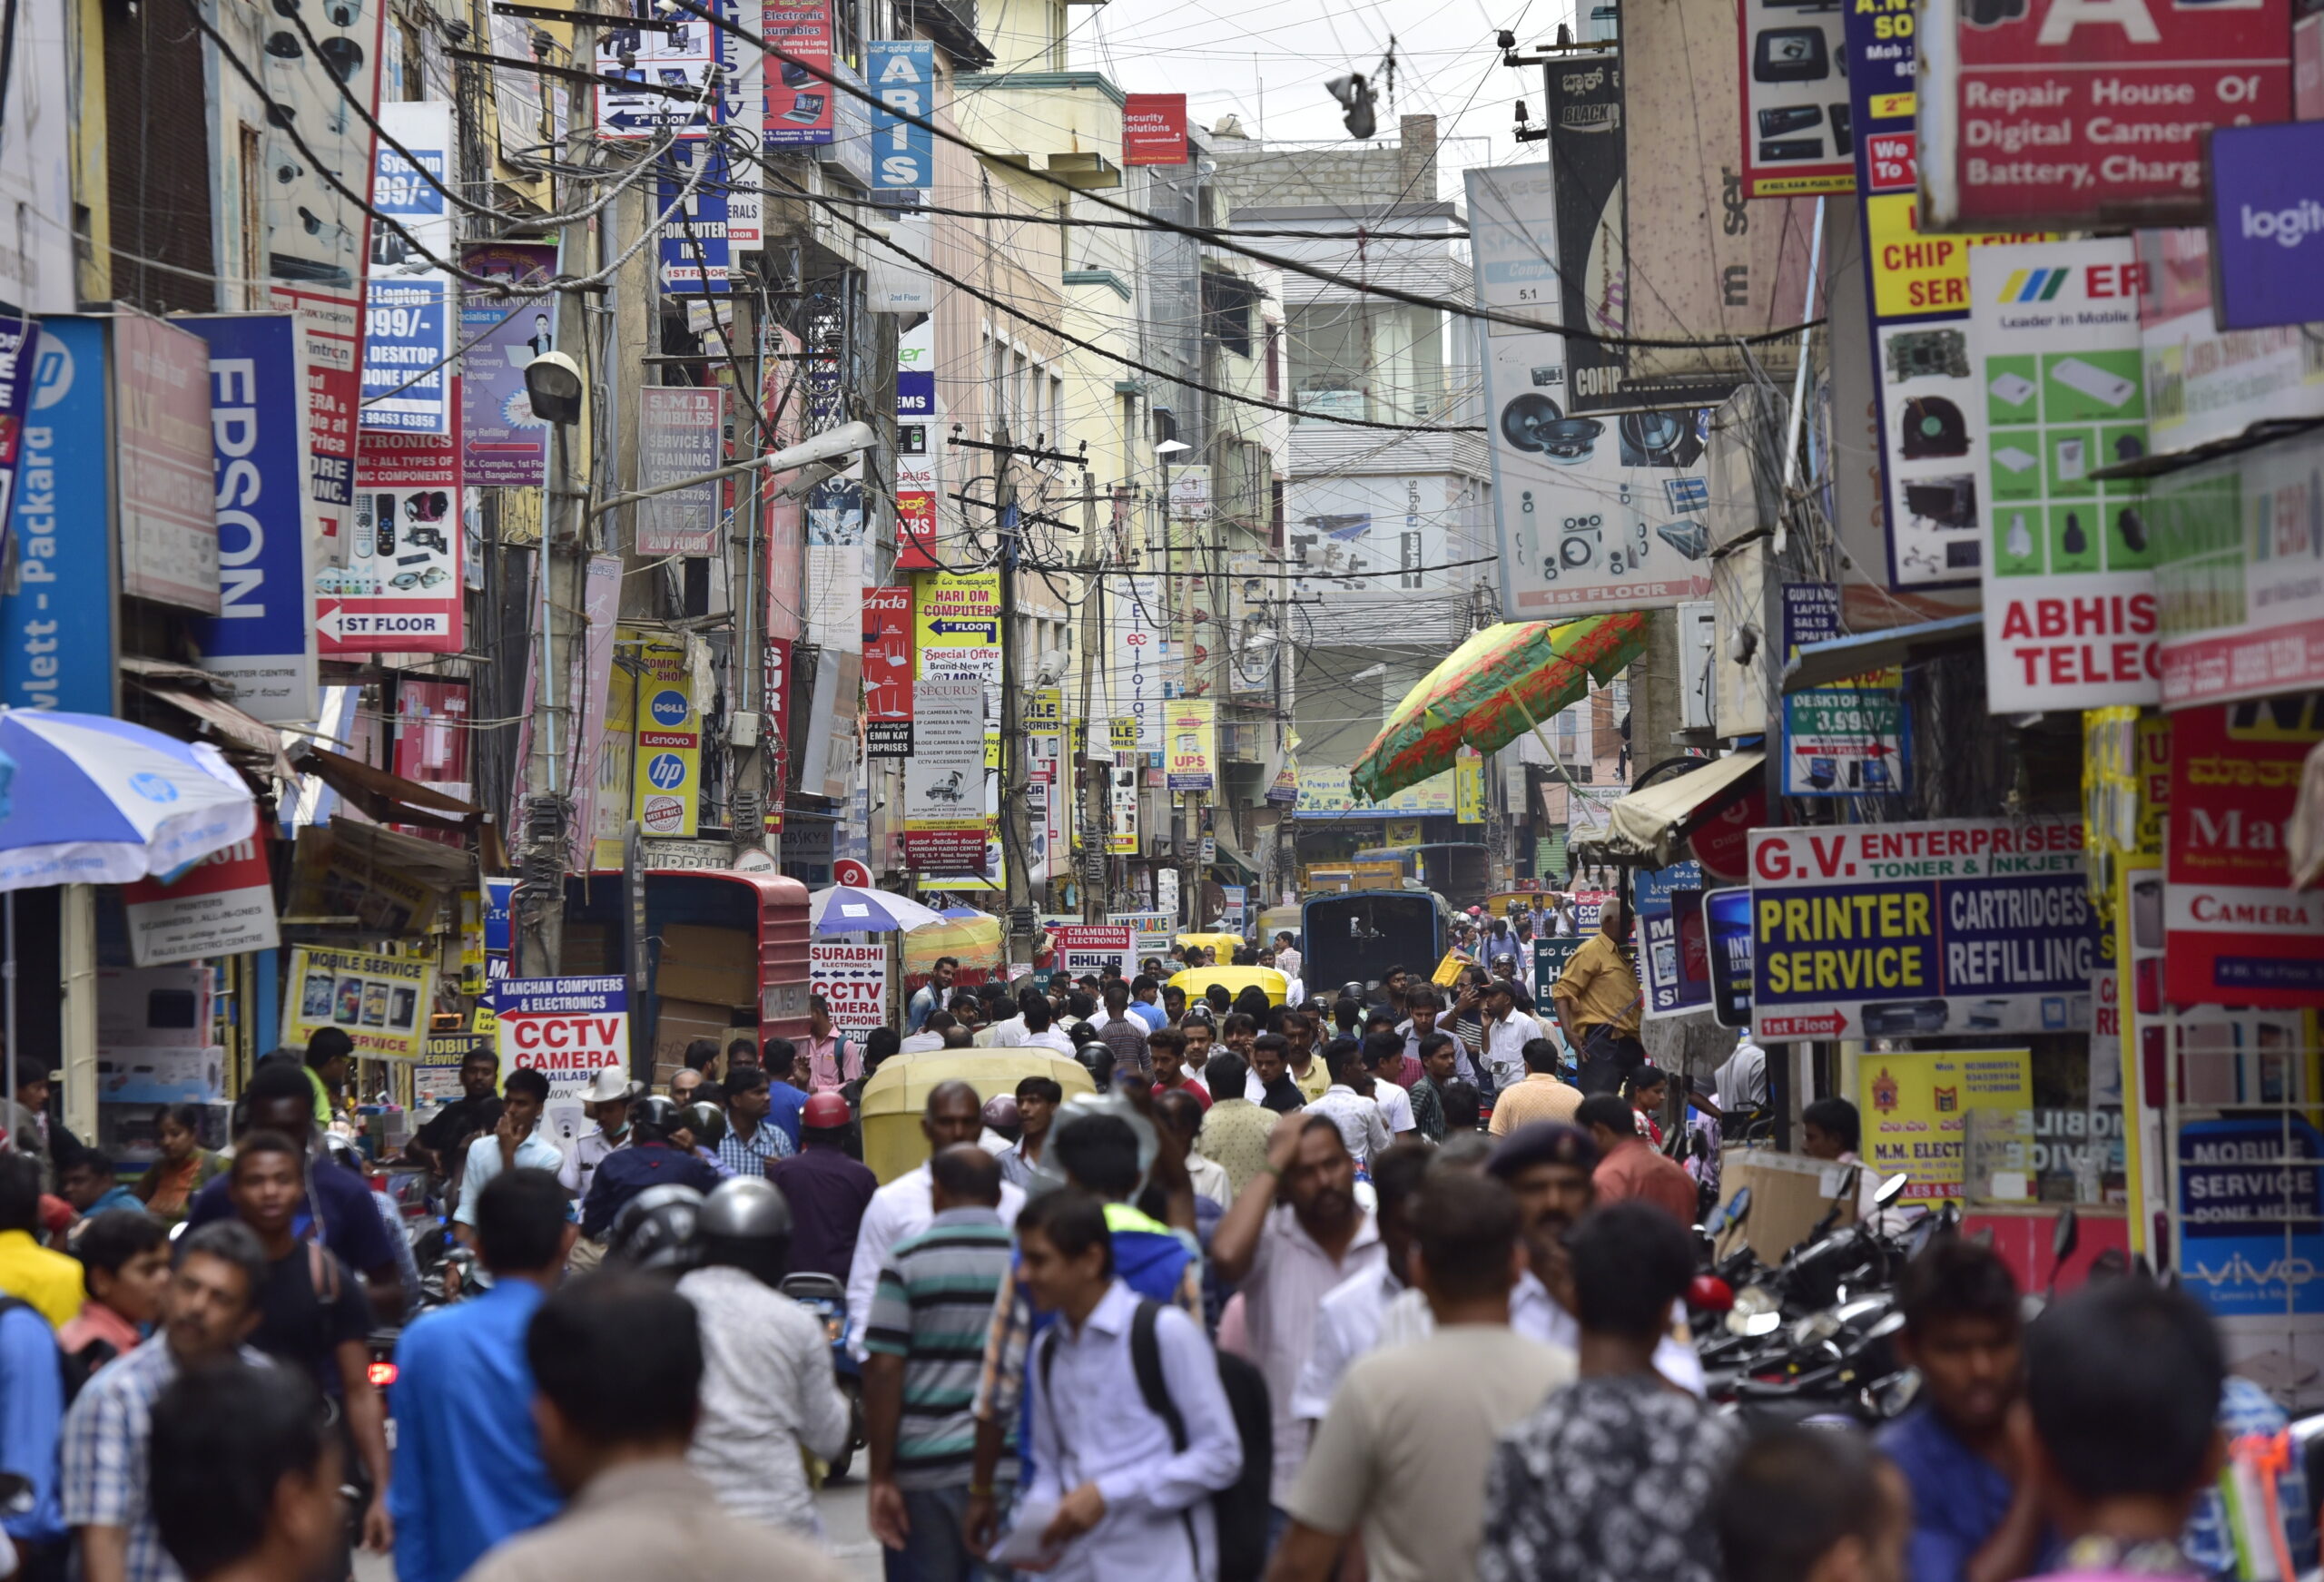 Daily Crunch: 8 Indian banks launch Account Aggregator to centralize consumers’ financial data